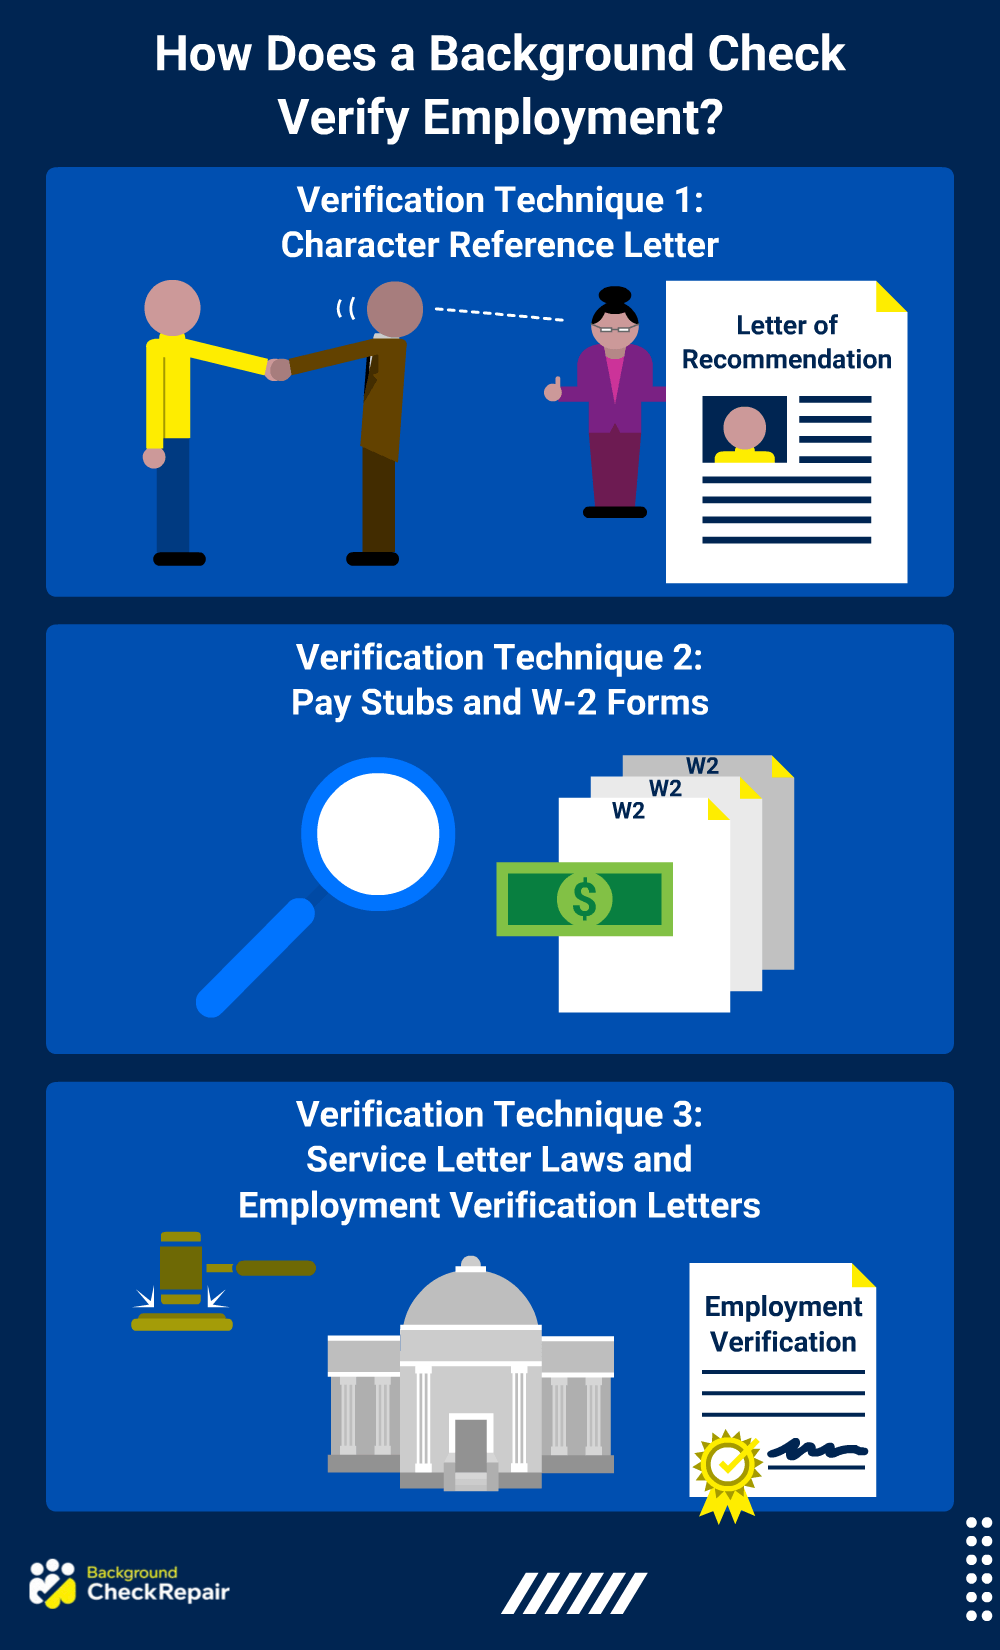 Does a background check verify employment graphic showing does background check show work history and can employers find out about past jobs using verification techniques that include employer background check techniques that are used for can employers check work history using character reference letters, w-2 forms and pay stubs, like does e verify show employment history, and service letter laws to find work history. 